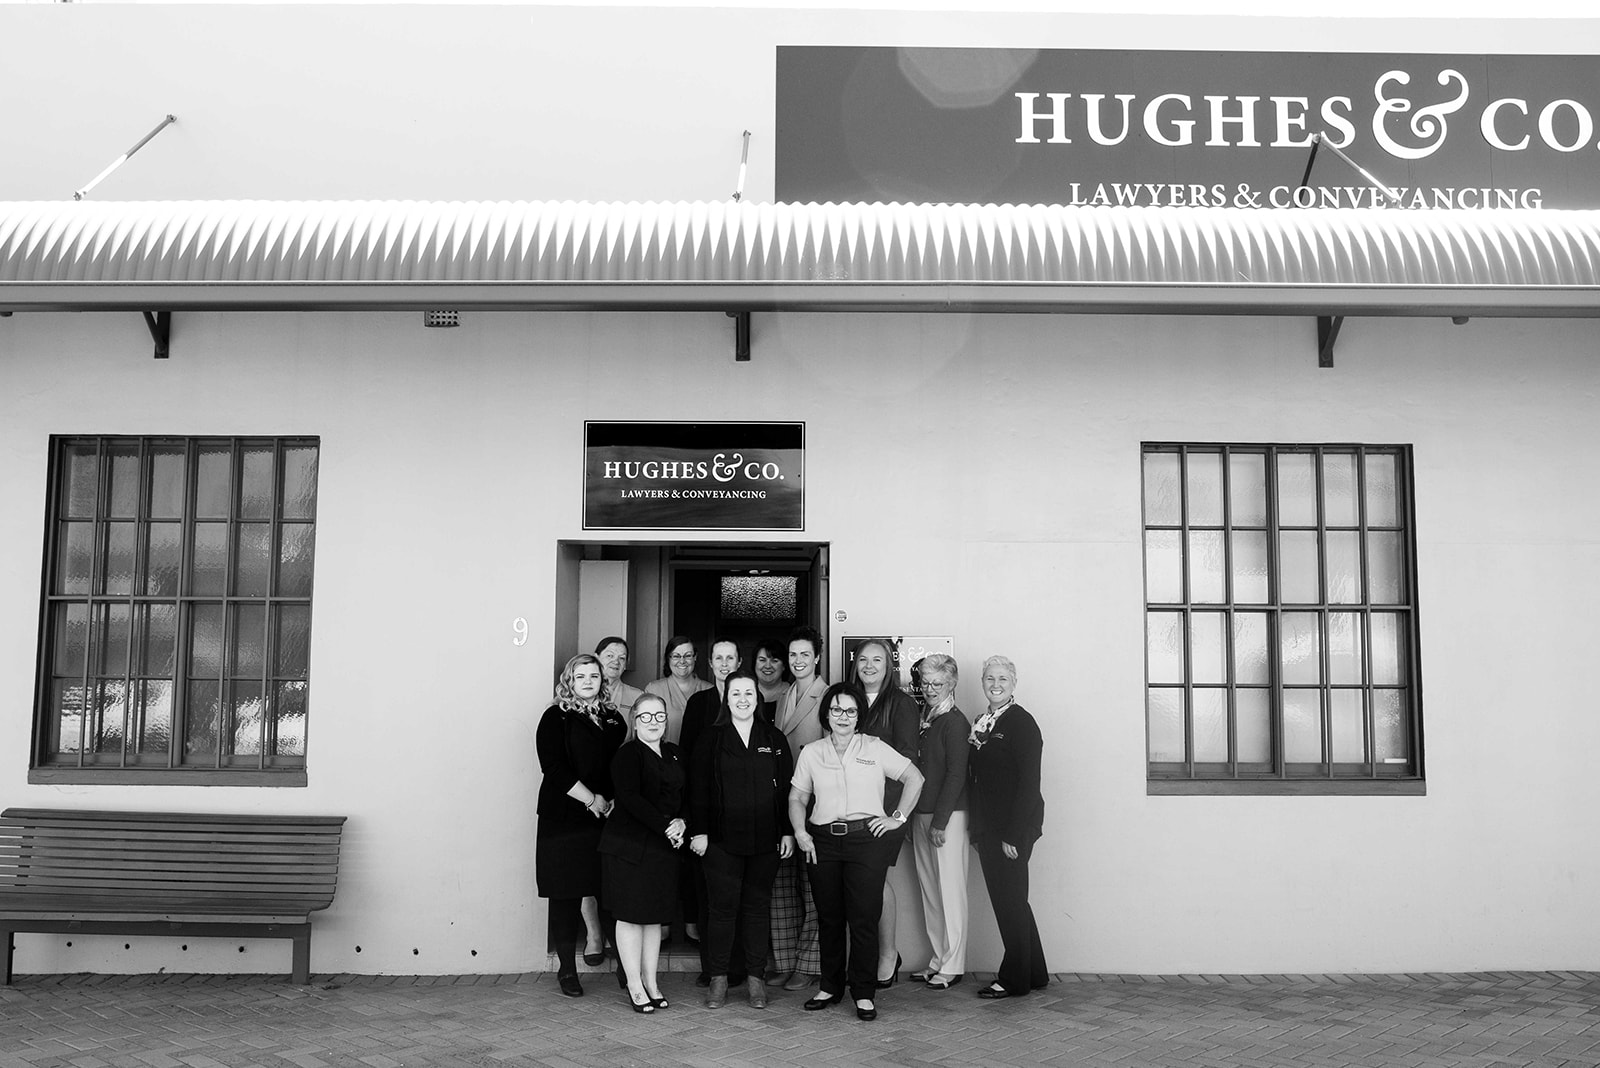 Hughes & Co. Lawyers & Conveyancing